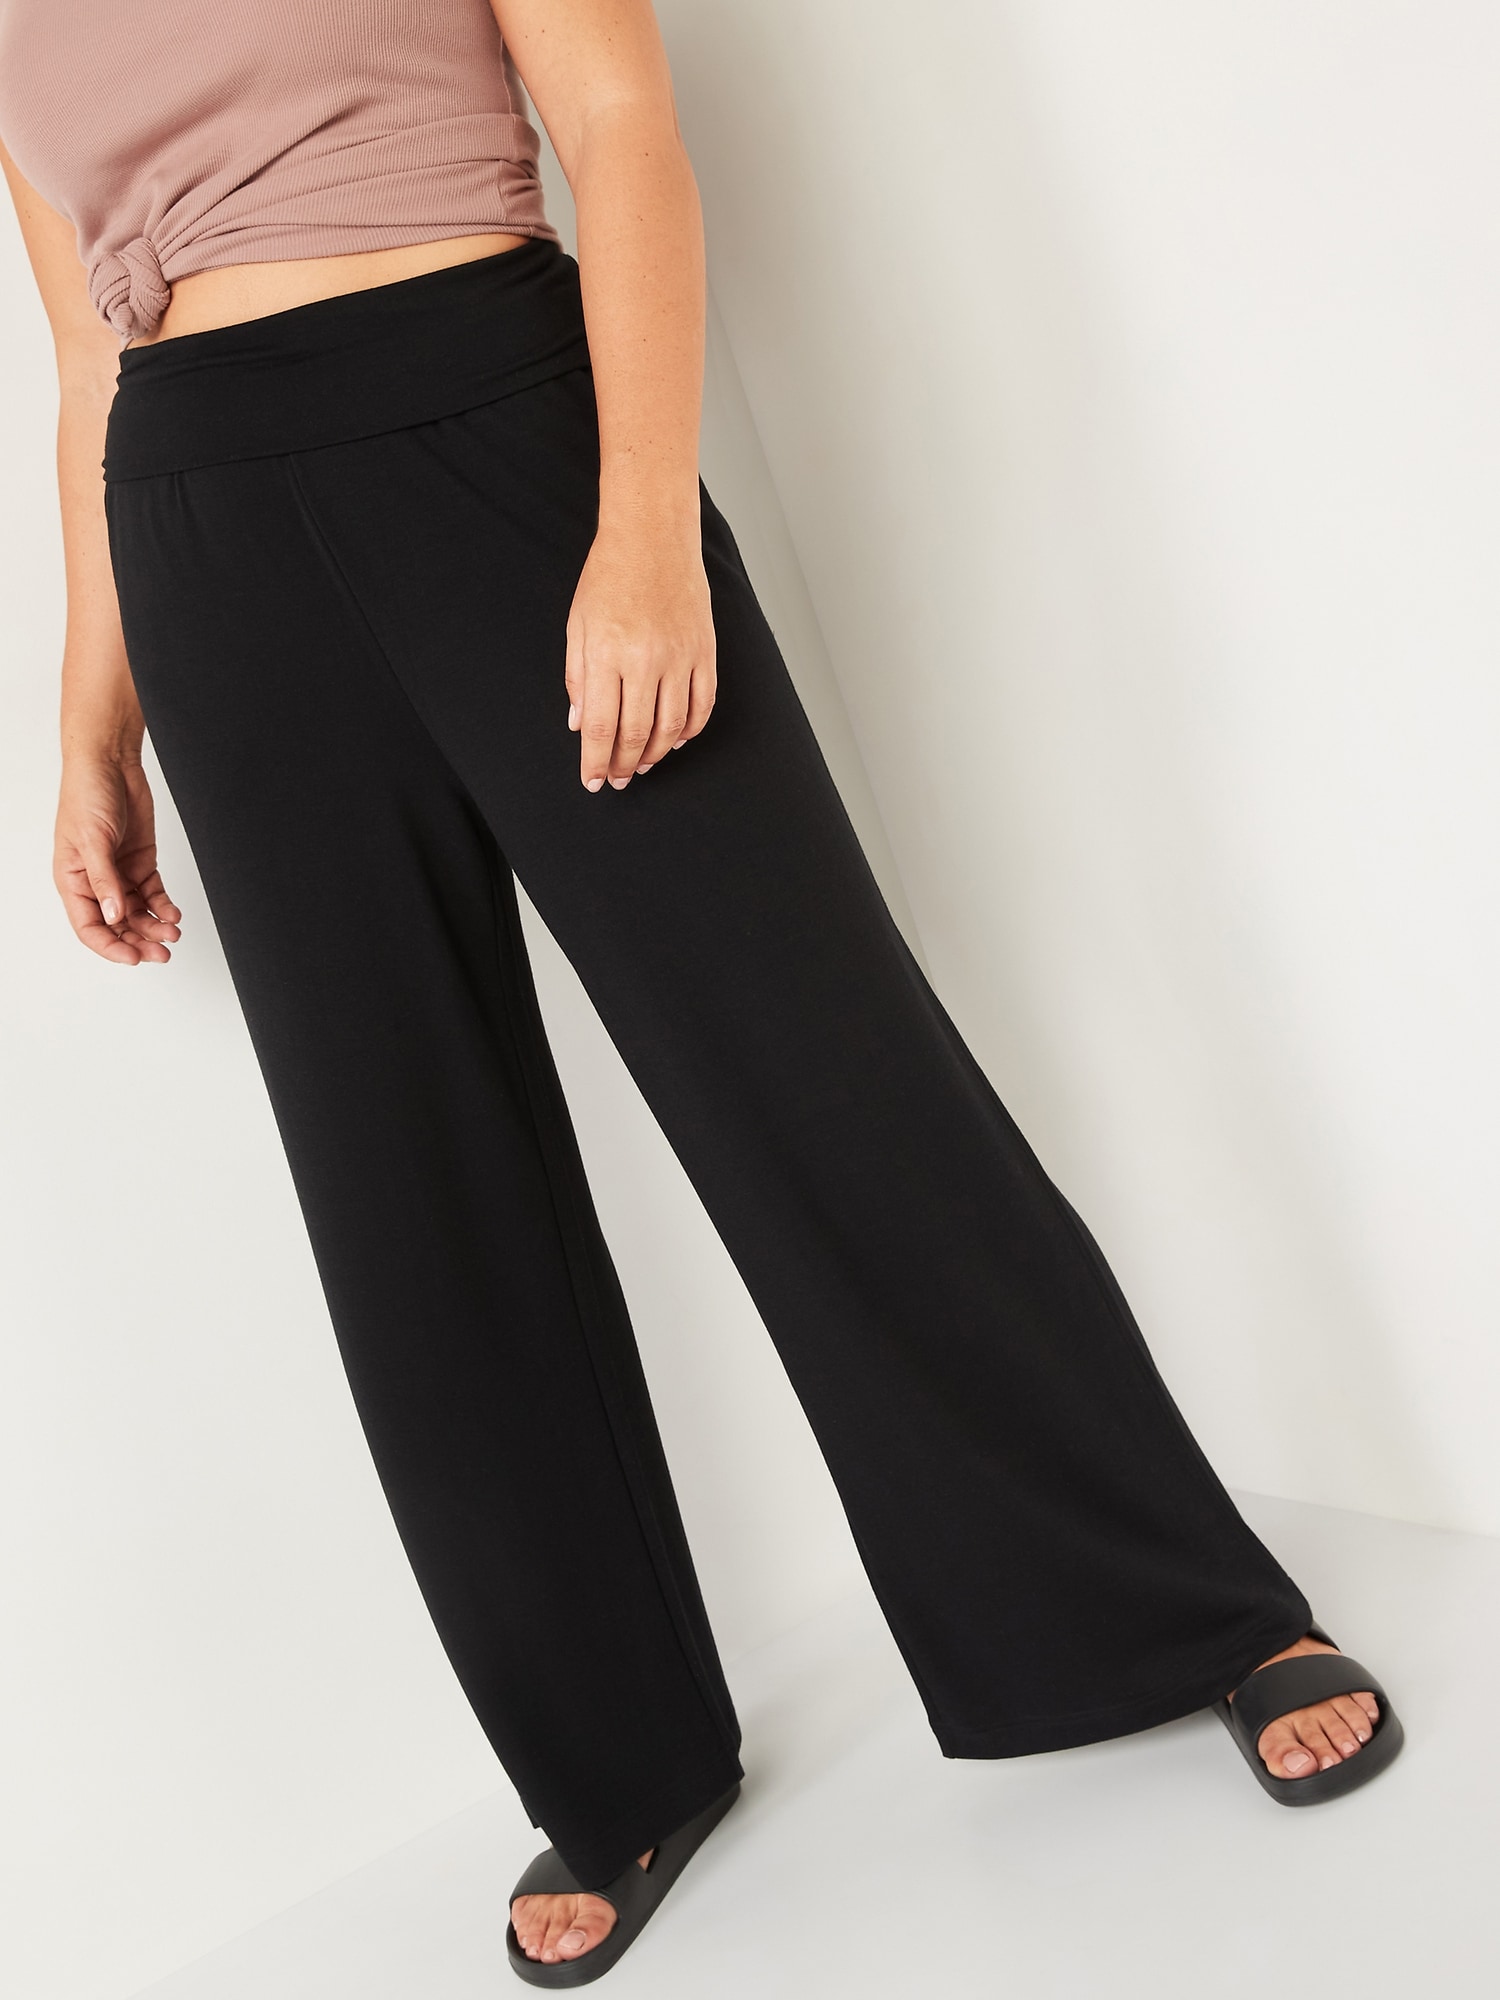 Stretch Rayon Pants for Women, Fold Over Stretch Waistband Pants